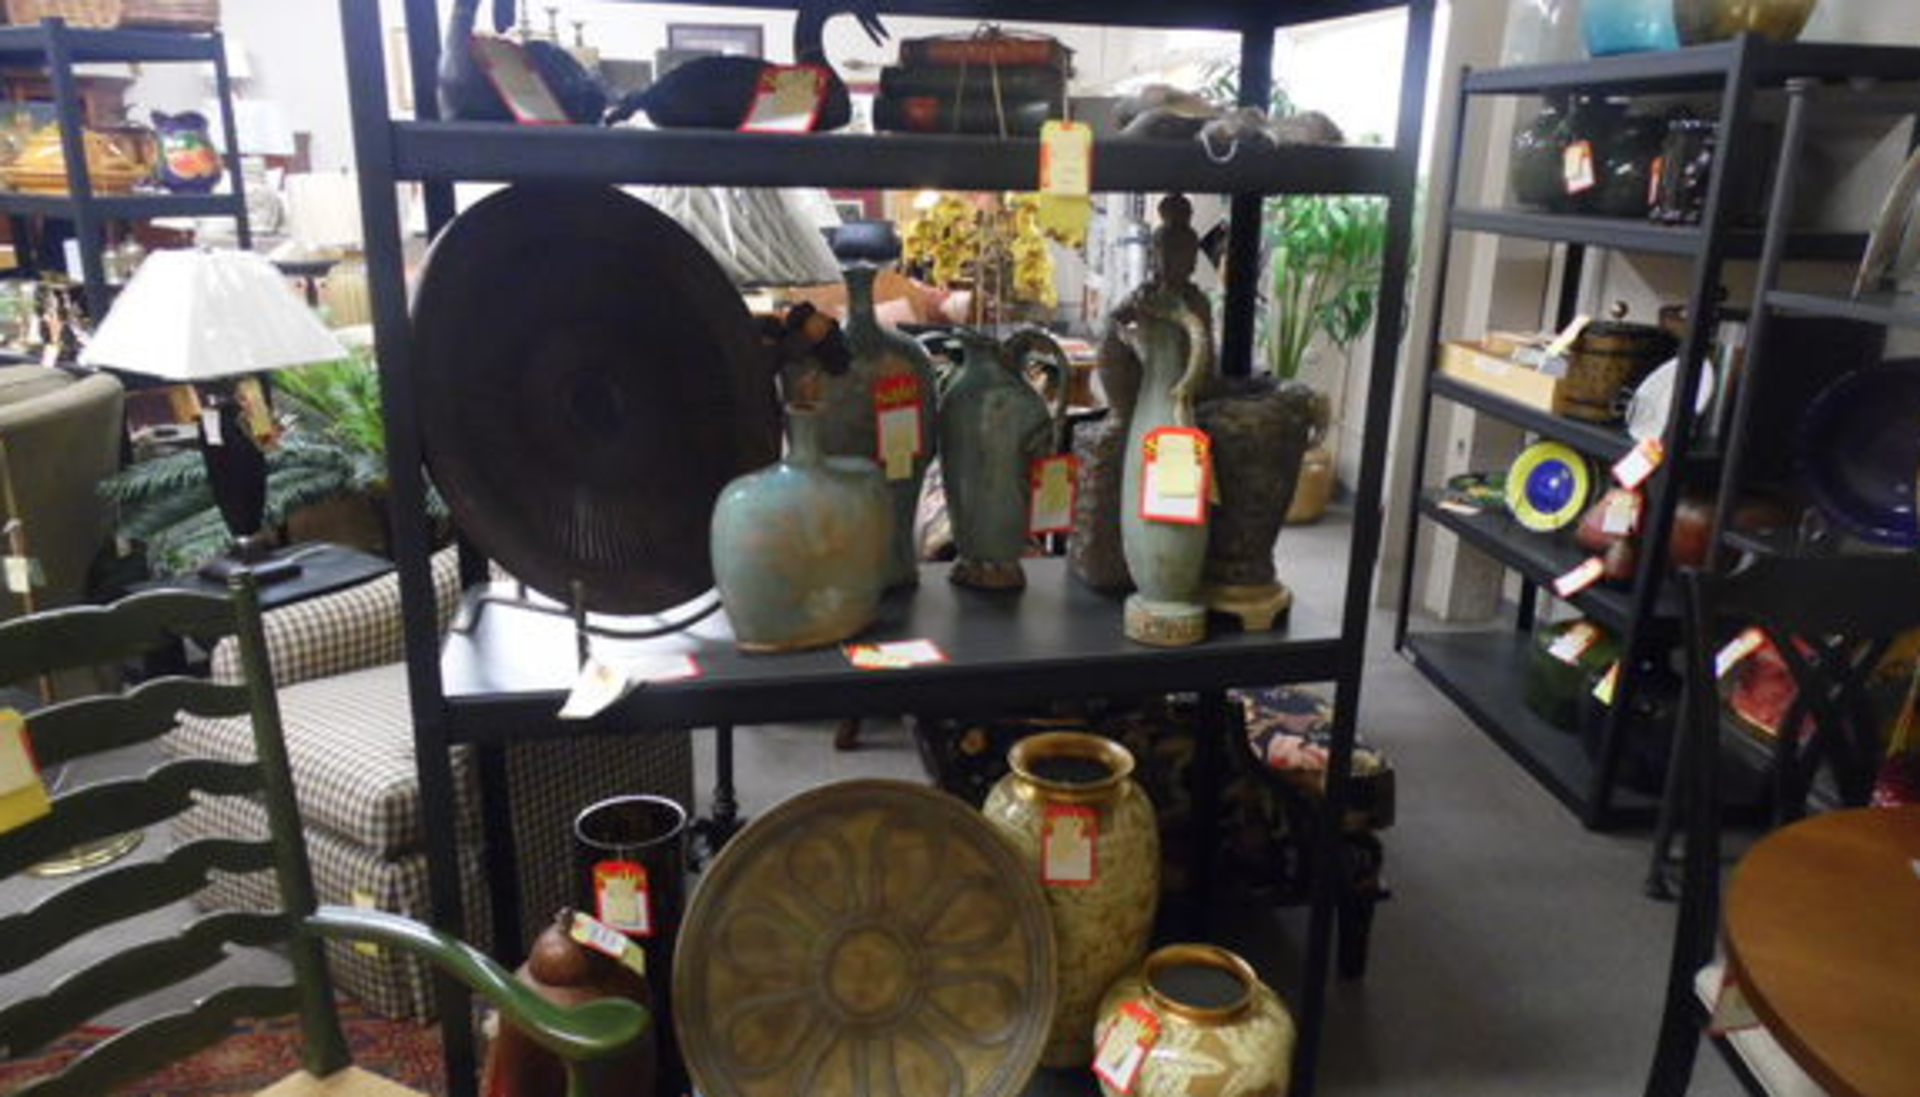 CLICK HERE FOR PREVIEW - Furniture & Decor Items Auction - Image 3 of 5